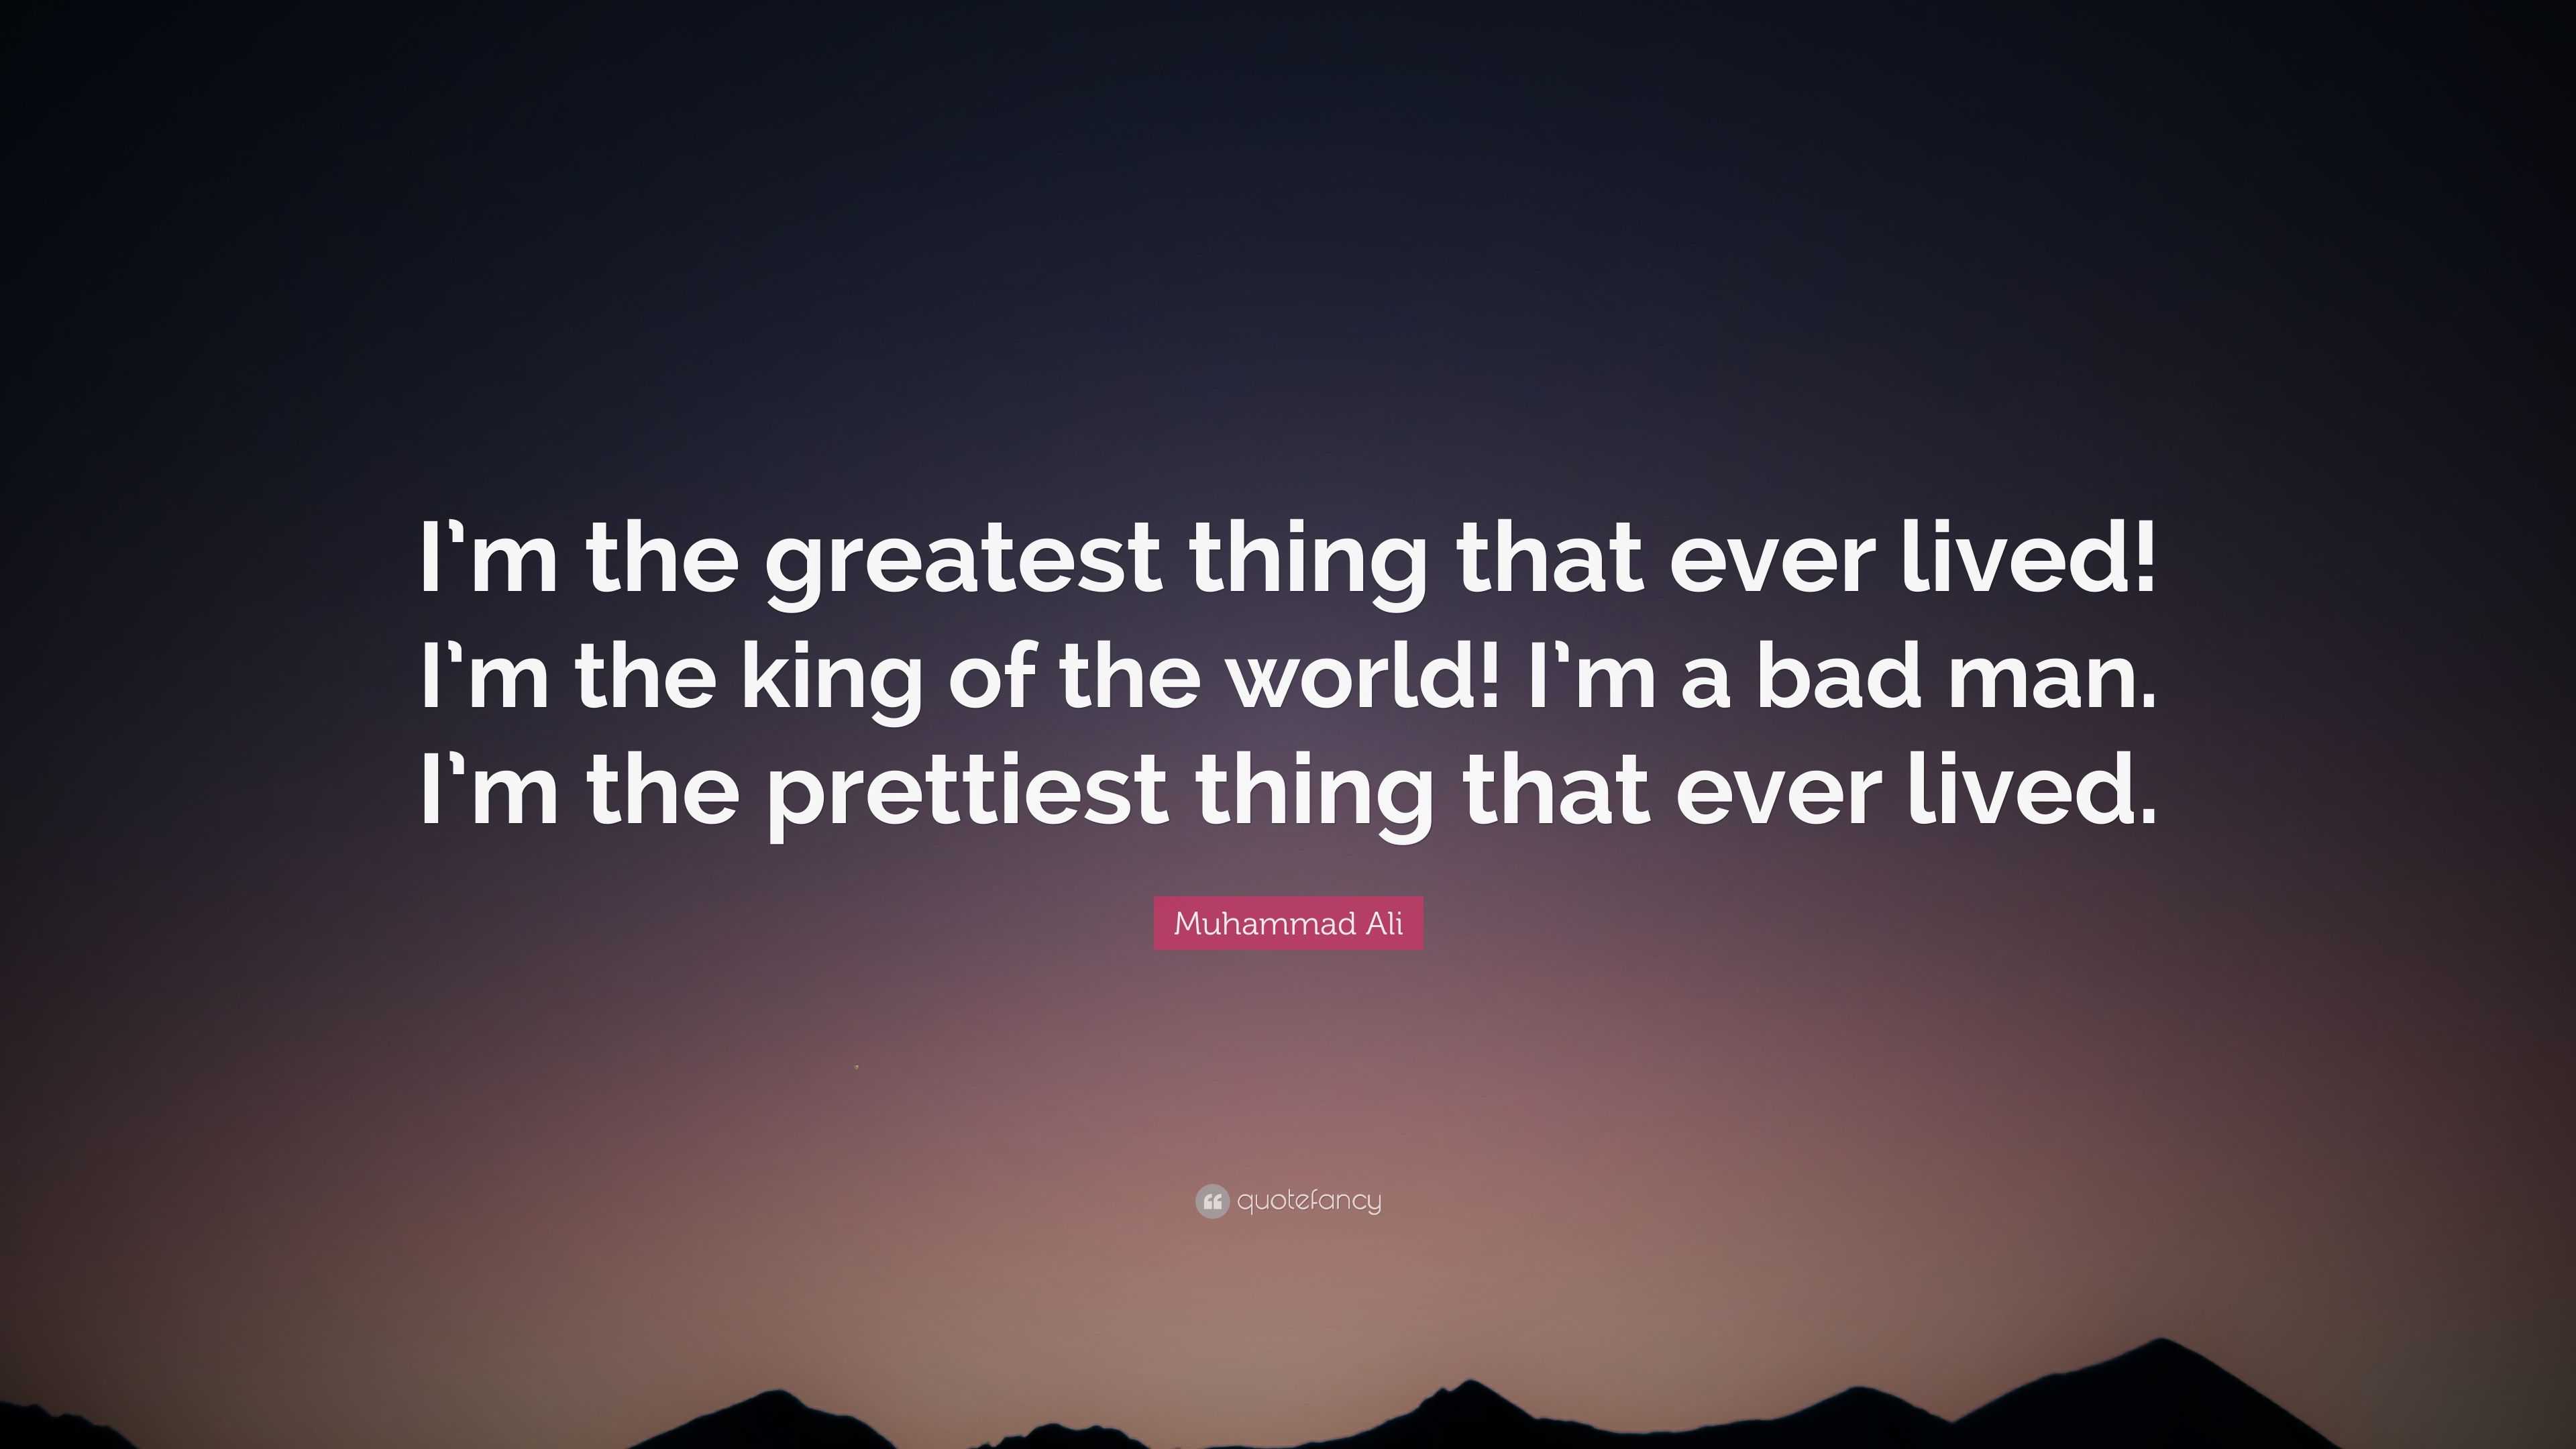 Muhammad Ali Quote: “I'm the greatest thing that ever lived! I'm the king  of the world! I'm a bad man. I'm the prettiest thing that ever live”